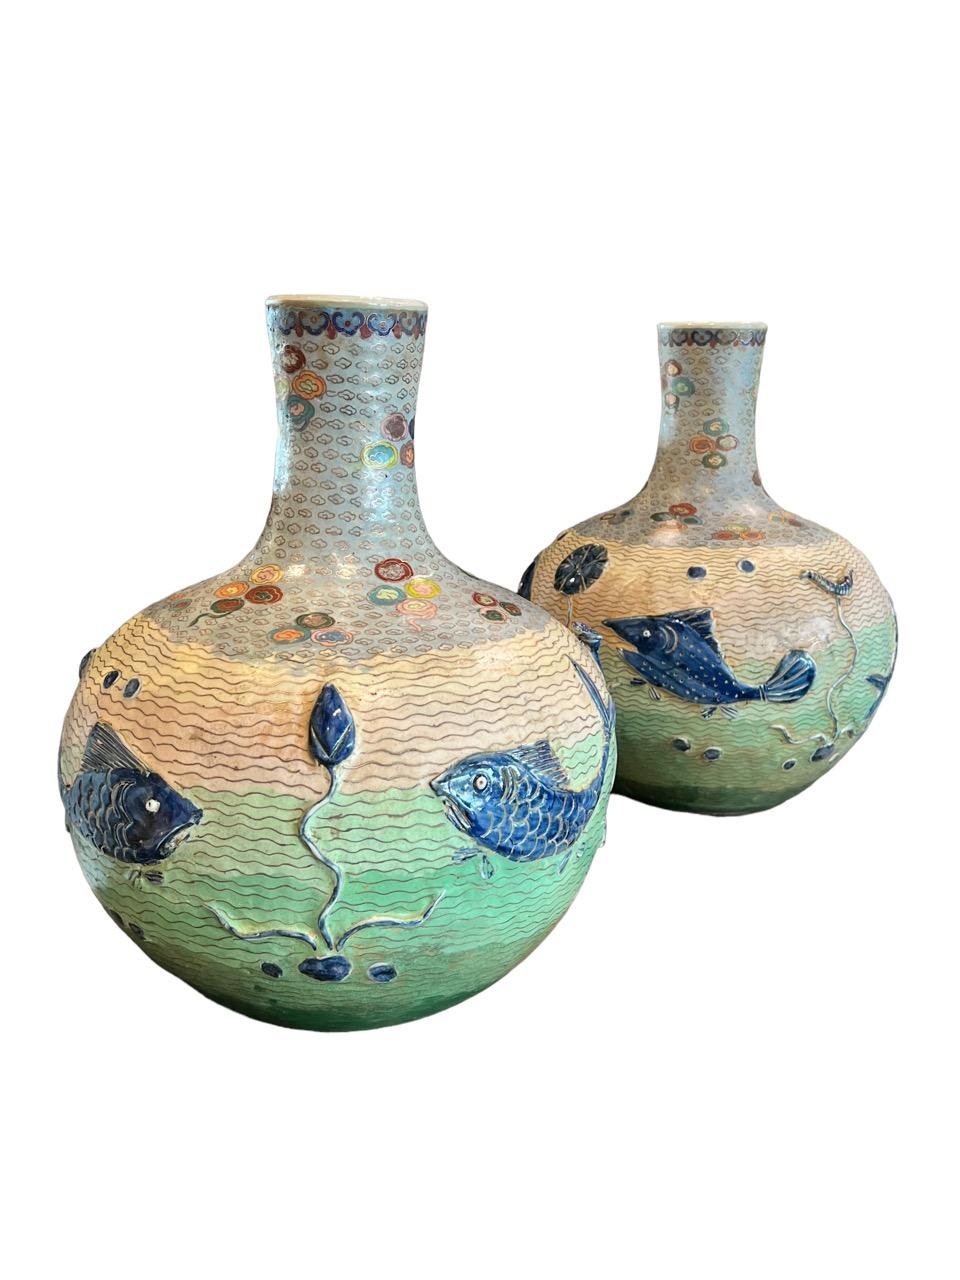 Pair of Early 20th Century '1900s' Chinese Cloisonné Enameled Porcelain Vases For Sale 2